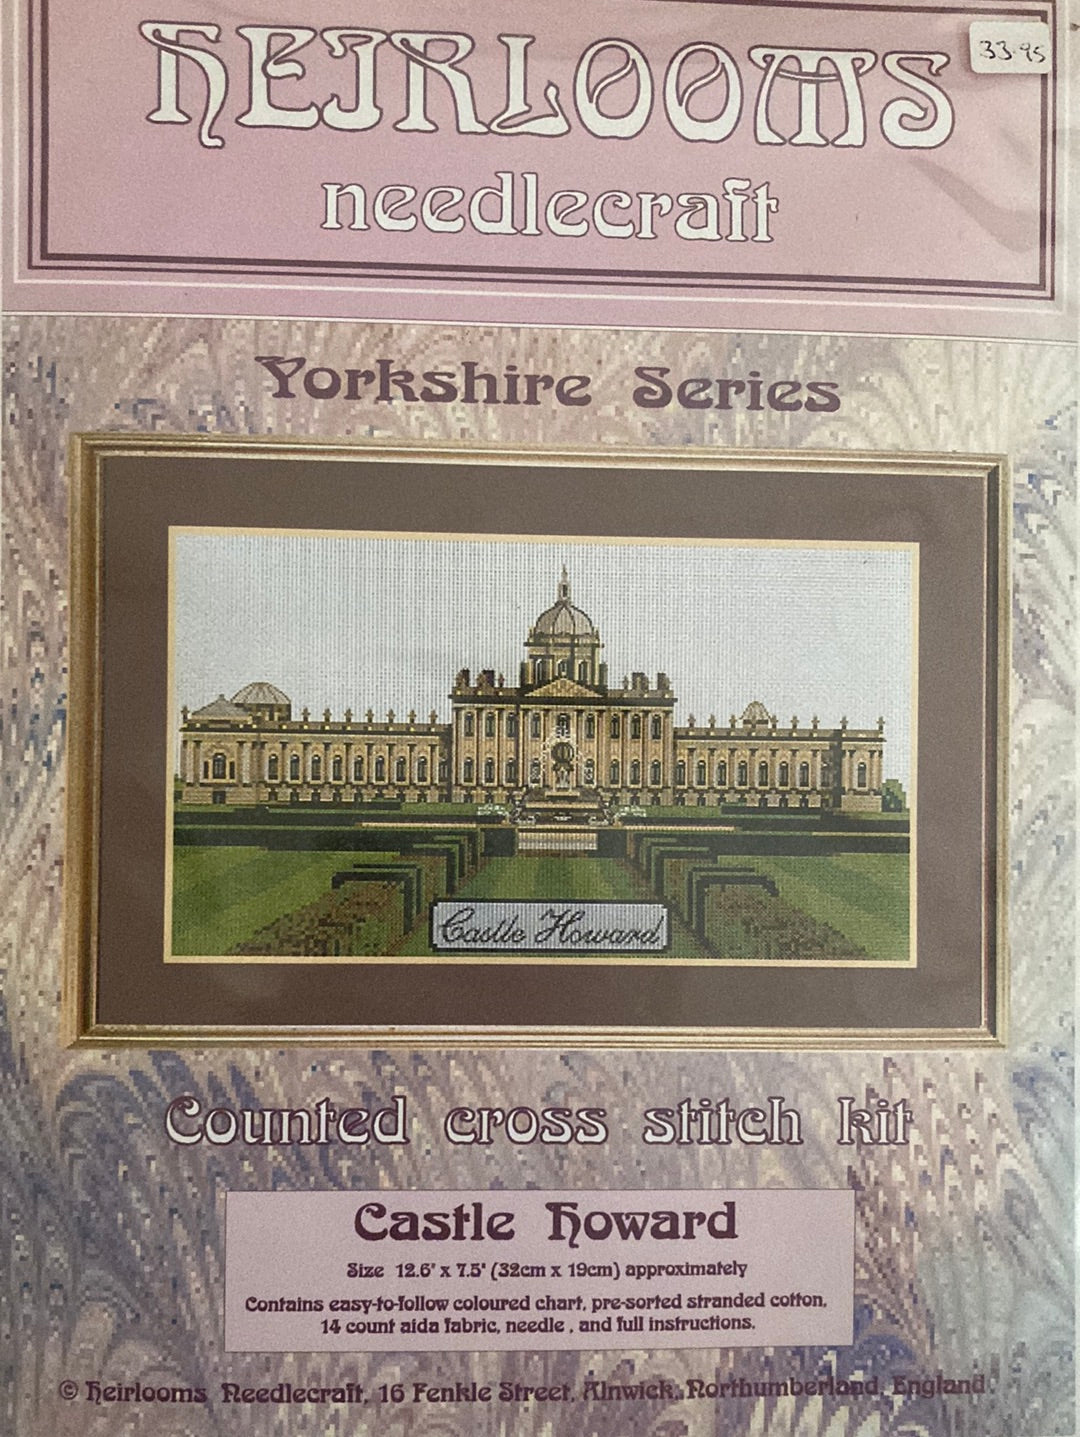 Castle Howard (Yorkshire Series) - Counted Cross Stitch Kit (Vintage)